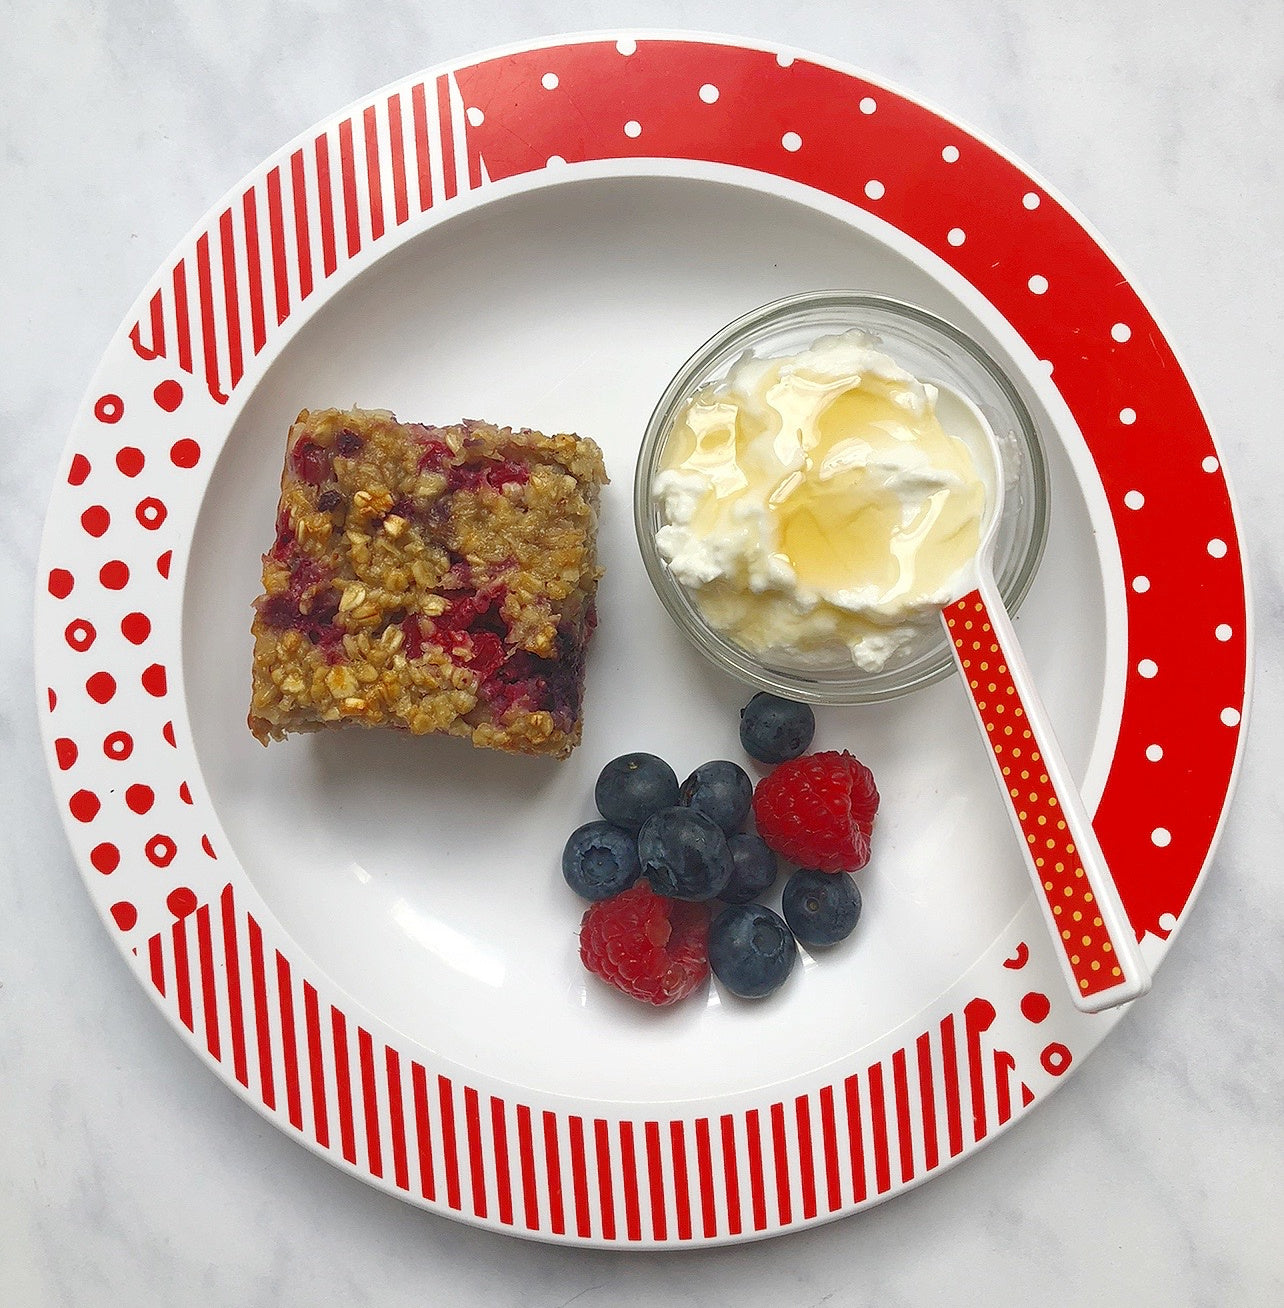 Kids classic plate with a breakfast bar, fresh berries and a serving of yogurtand honey on it.